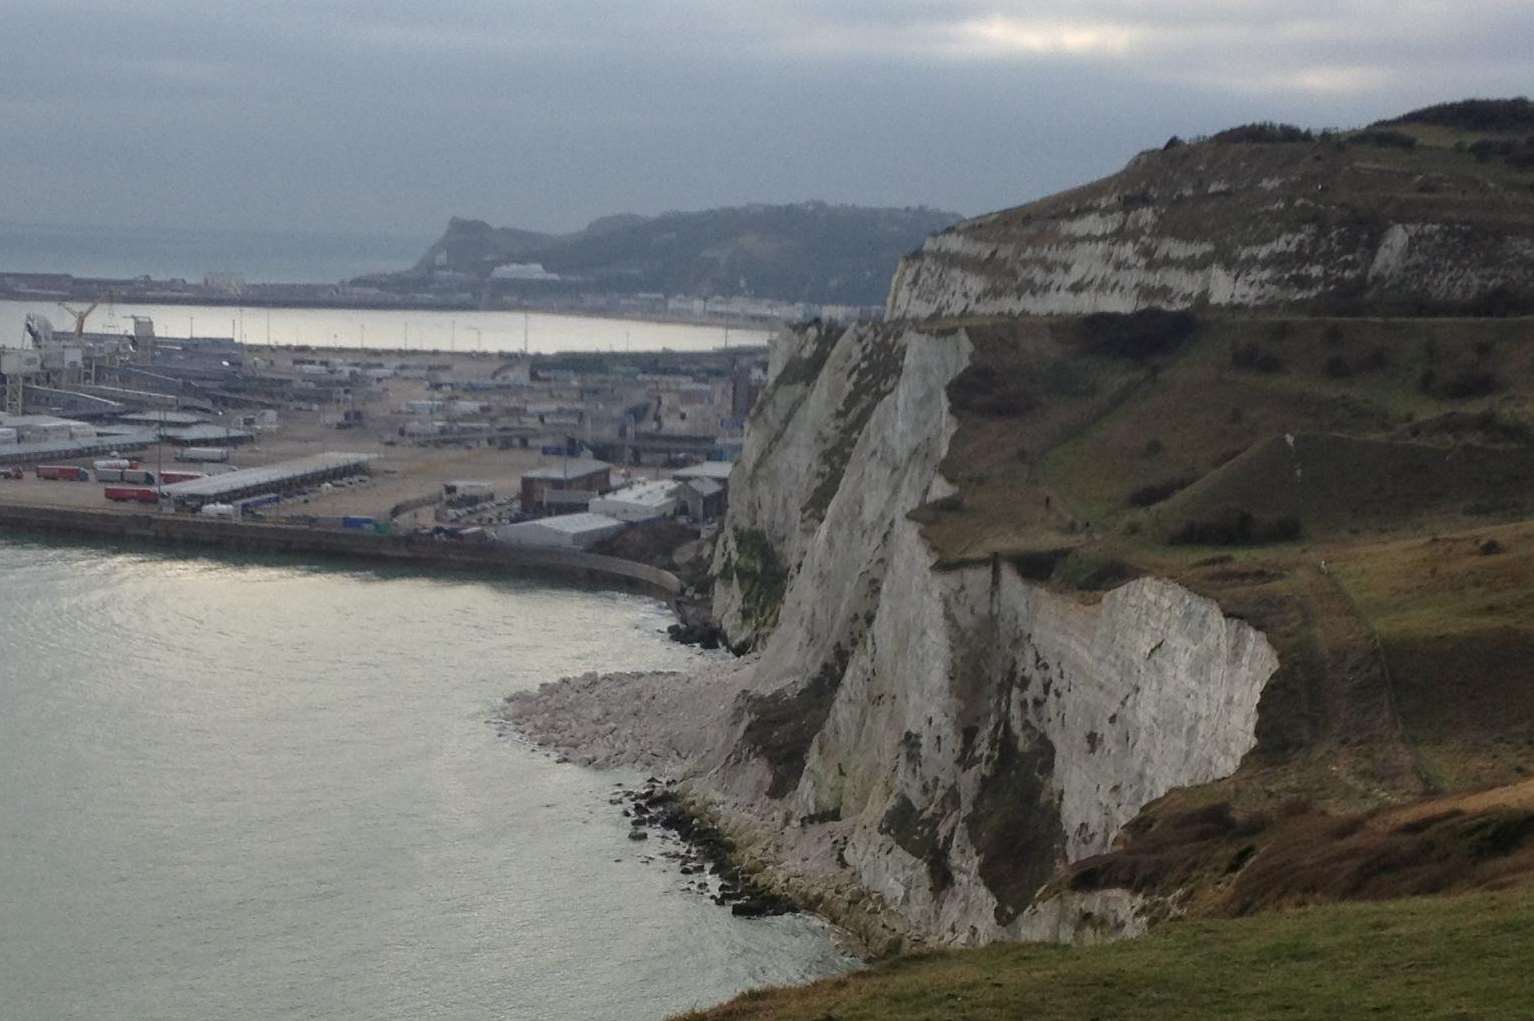 A man's body was found at Langdon Cliffs, Dover